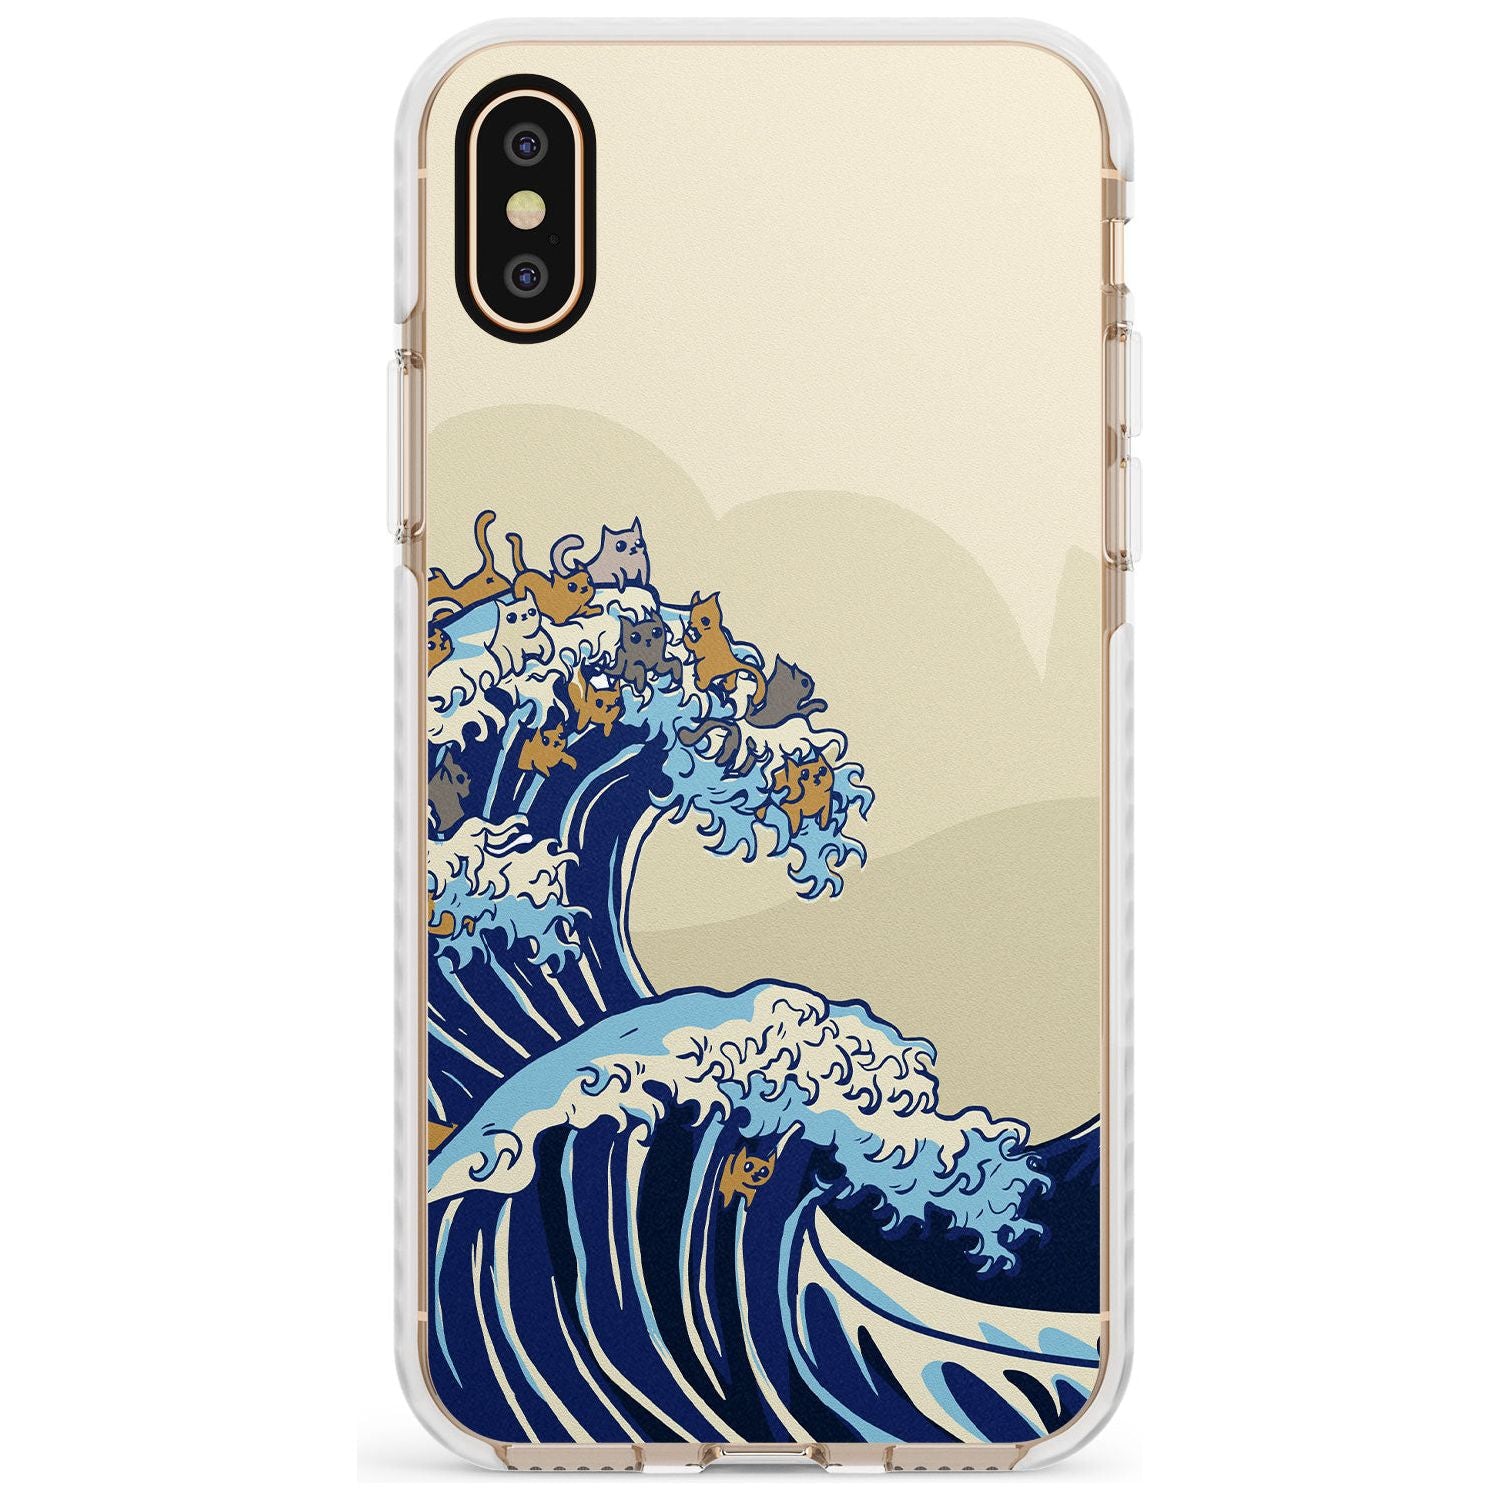 The Great Cat Wave Impact Phone Case for iPhone X XS Max XR